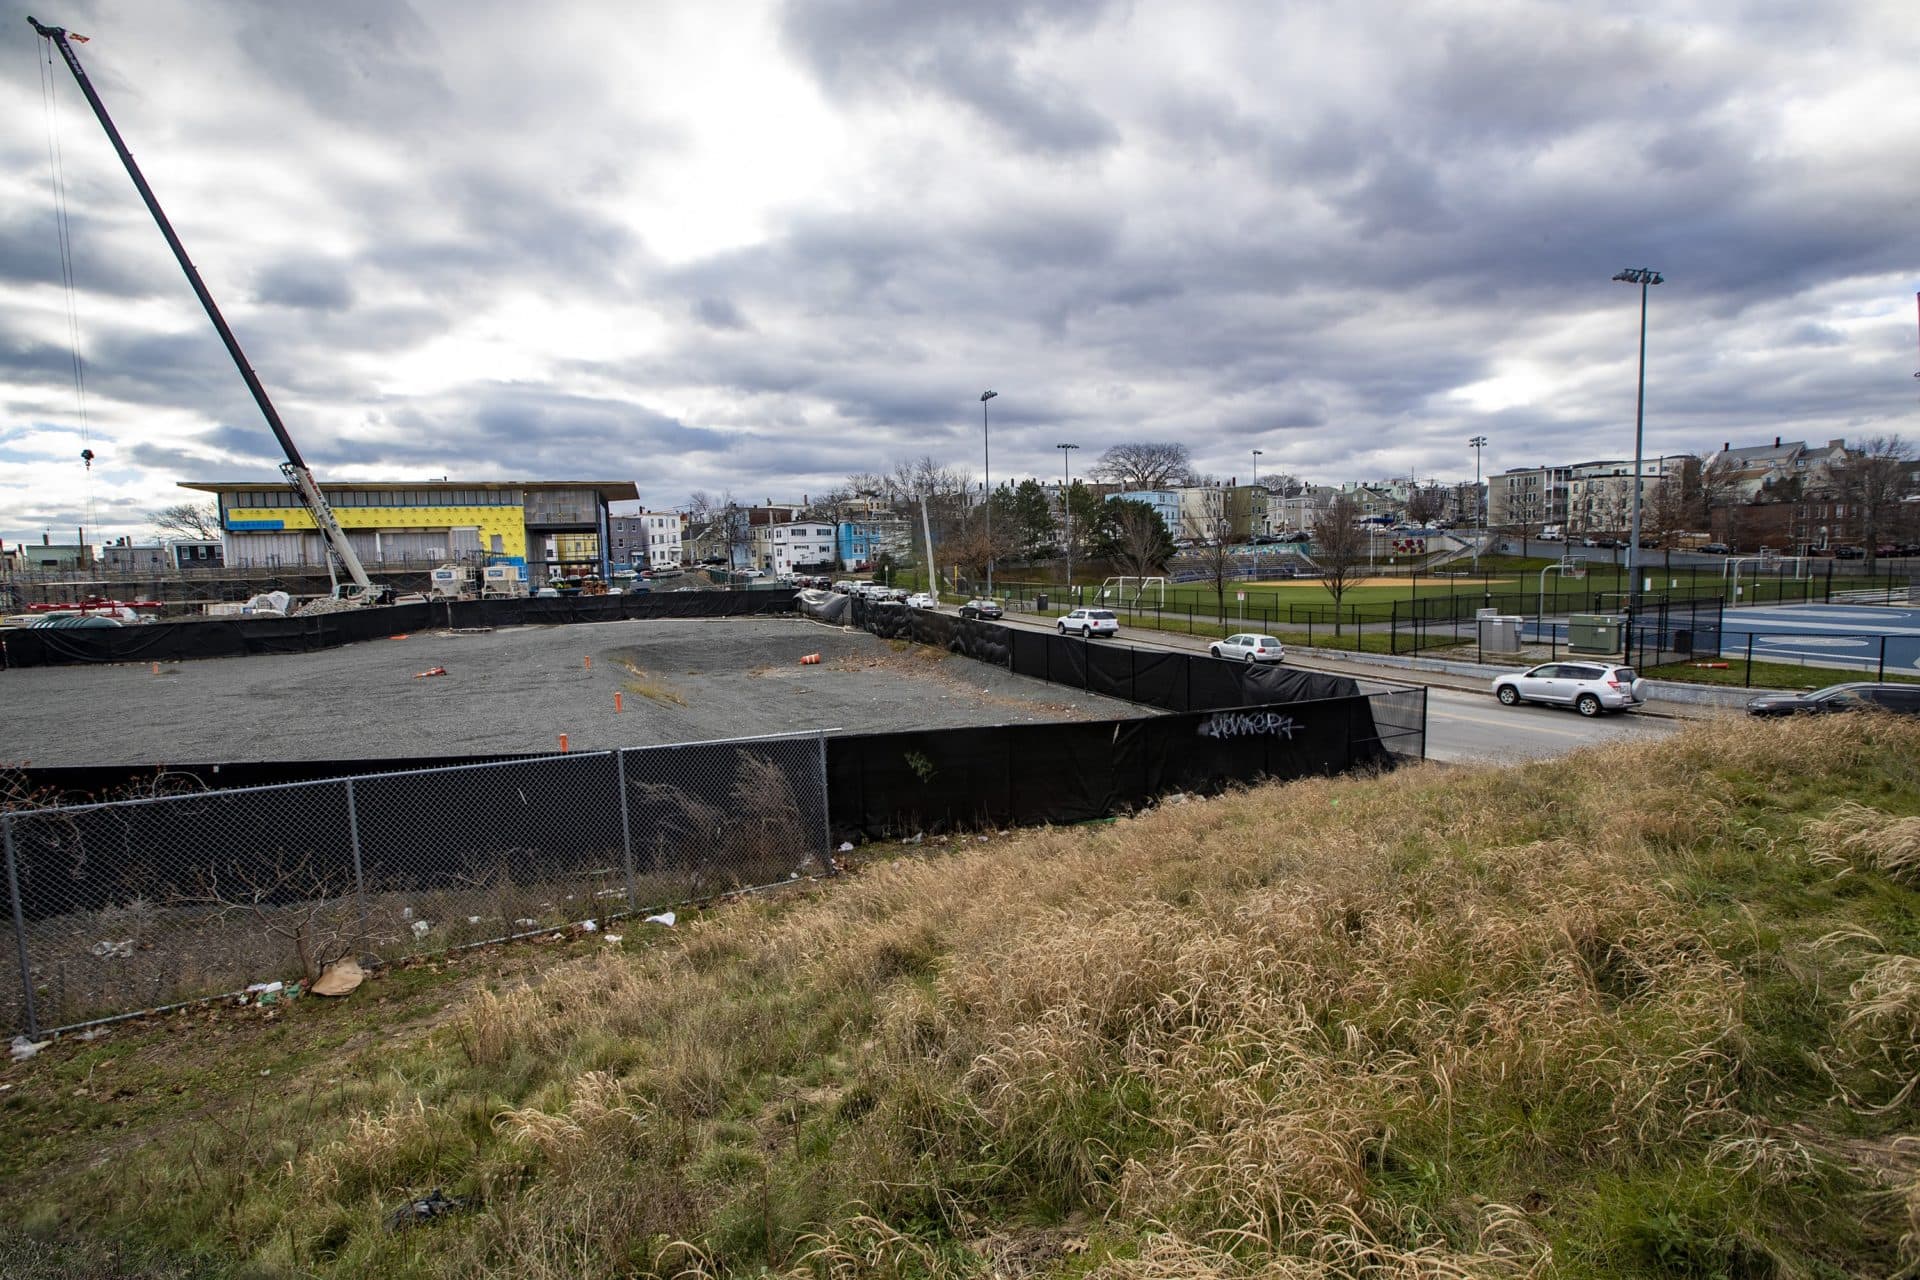 The empty lot where Eversource plans to build a substation in the City Yards, which is across the street from the American Legion Playground and behind the new East Boston Police station being constructed. (Jesse Costa/WBUR)